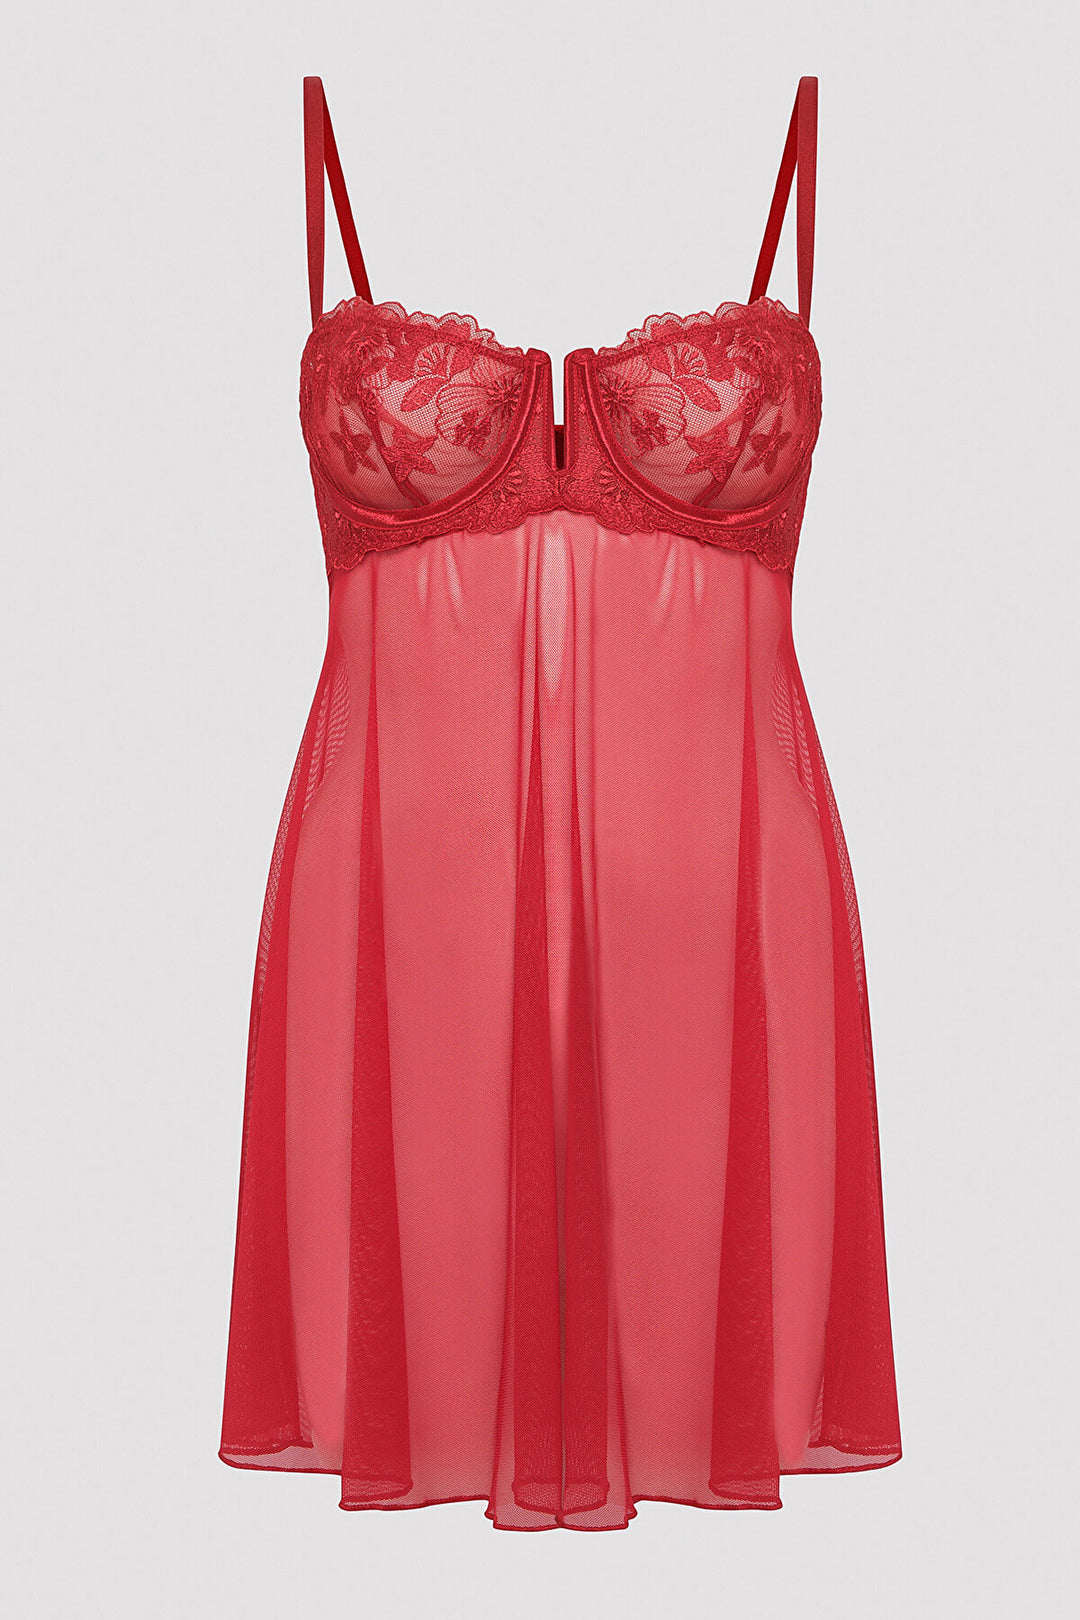 Broidery Red Babydoll